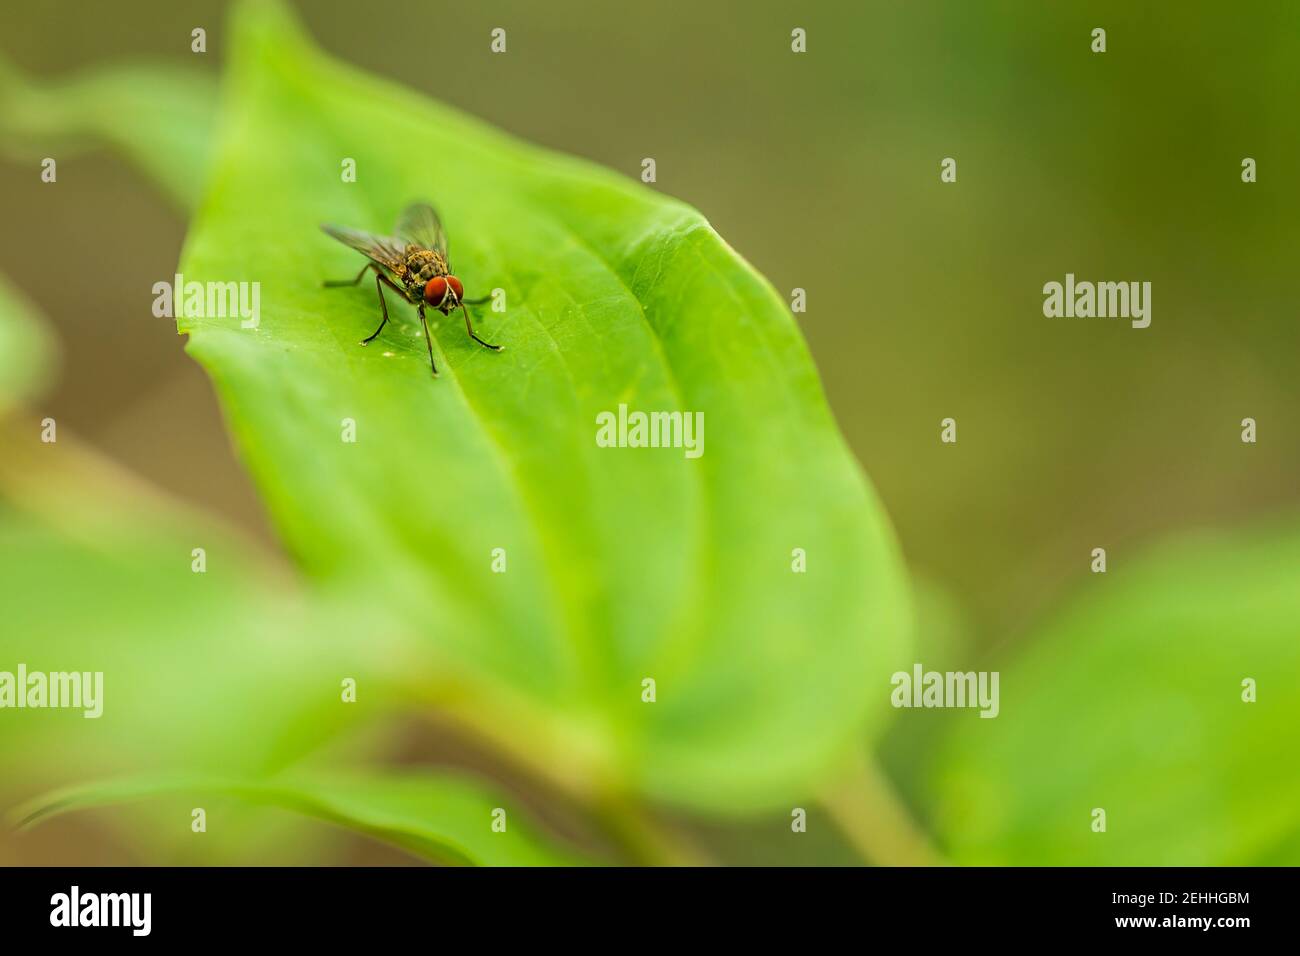 A fly (Housefly, Musca Domestica) on a green leaf Stock Photo